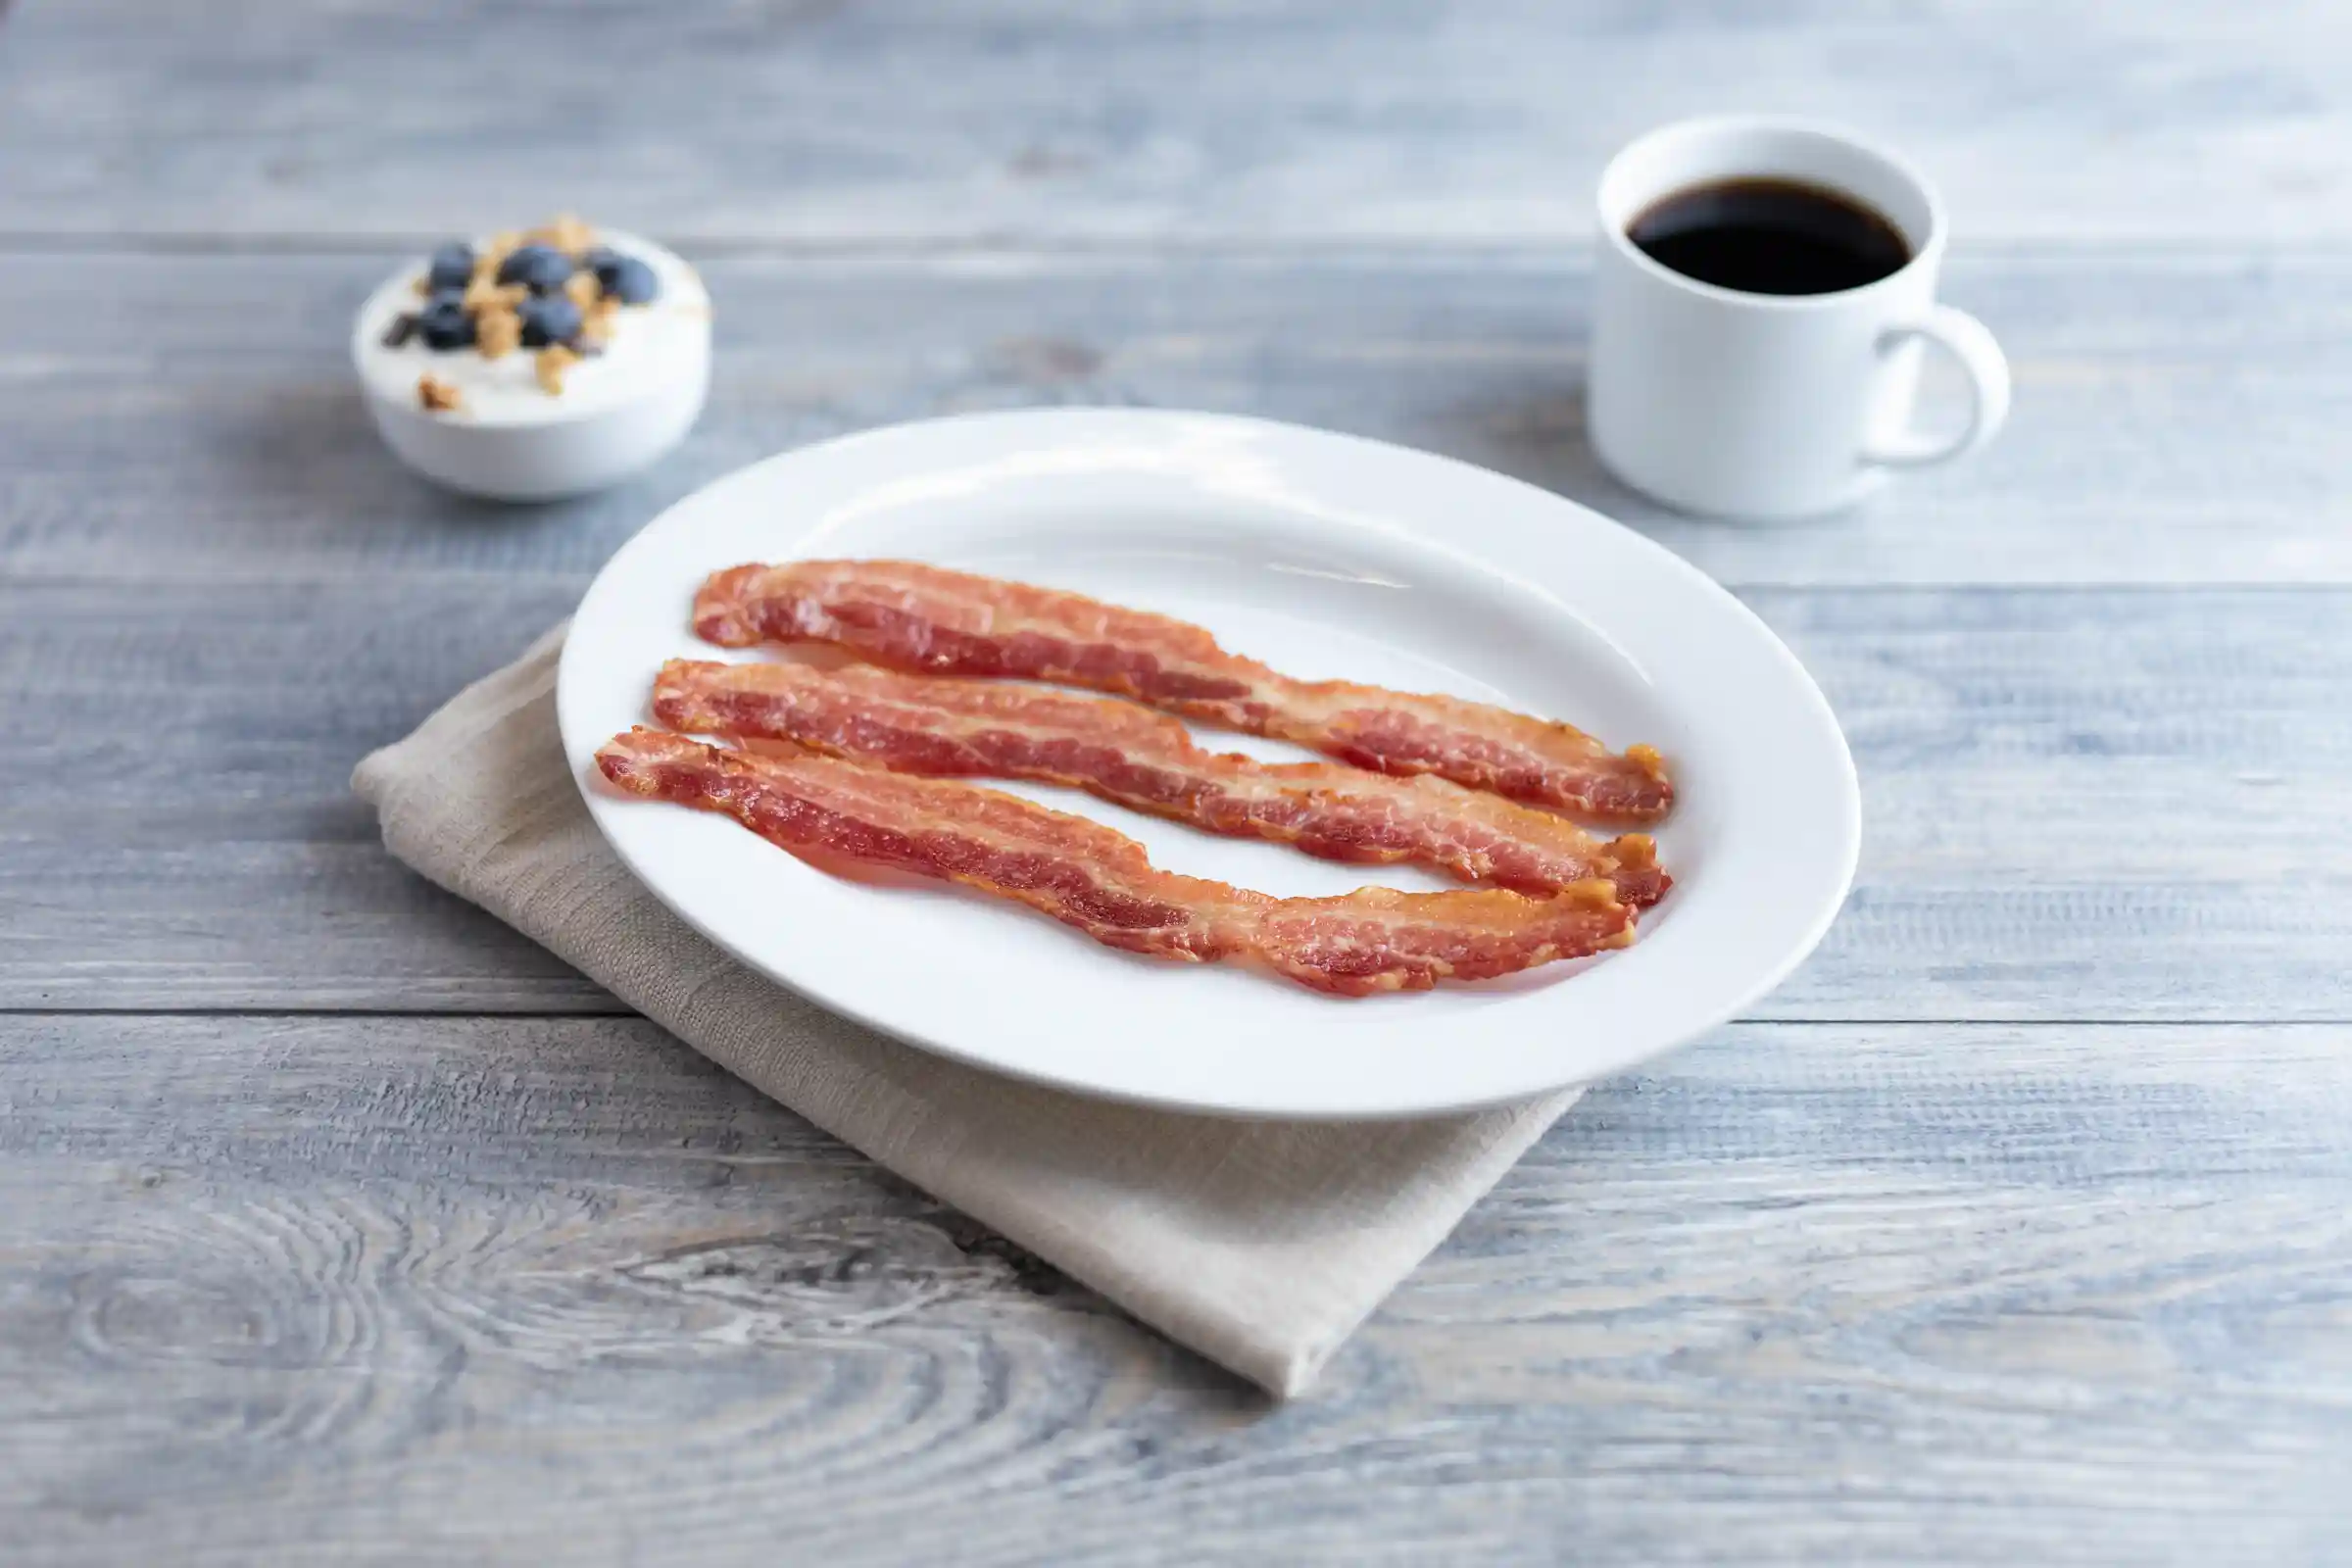 Wright® Brand Naturally Hickory Smoked Thin Sliced Bacon, Bulk, 15 Lbs, 18-22 Slices per Pound, Gas Flushed_image_11